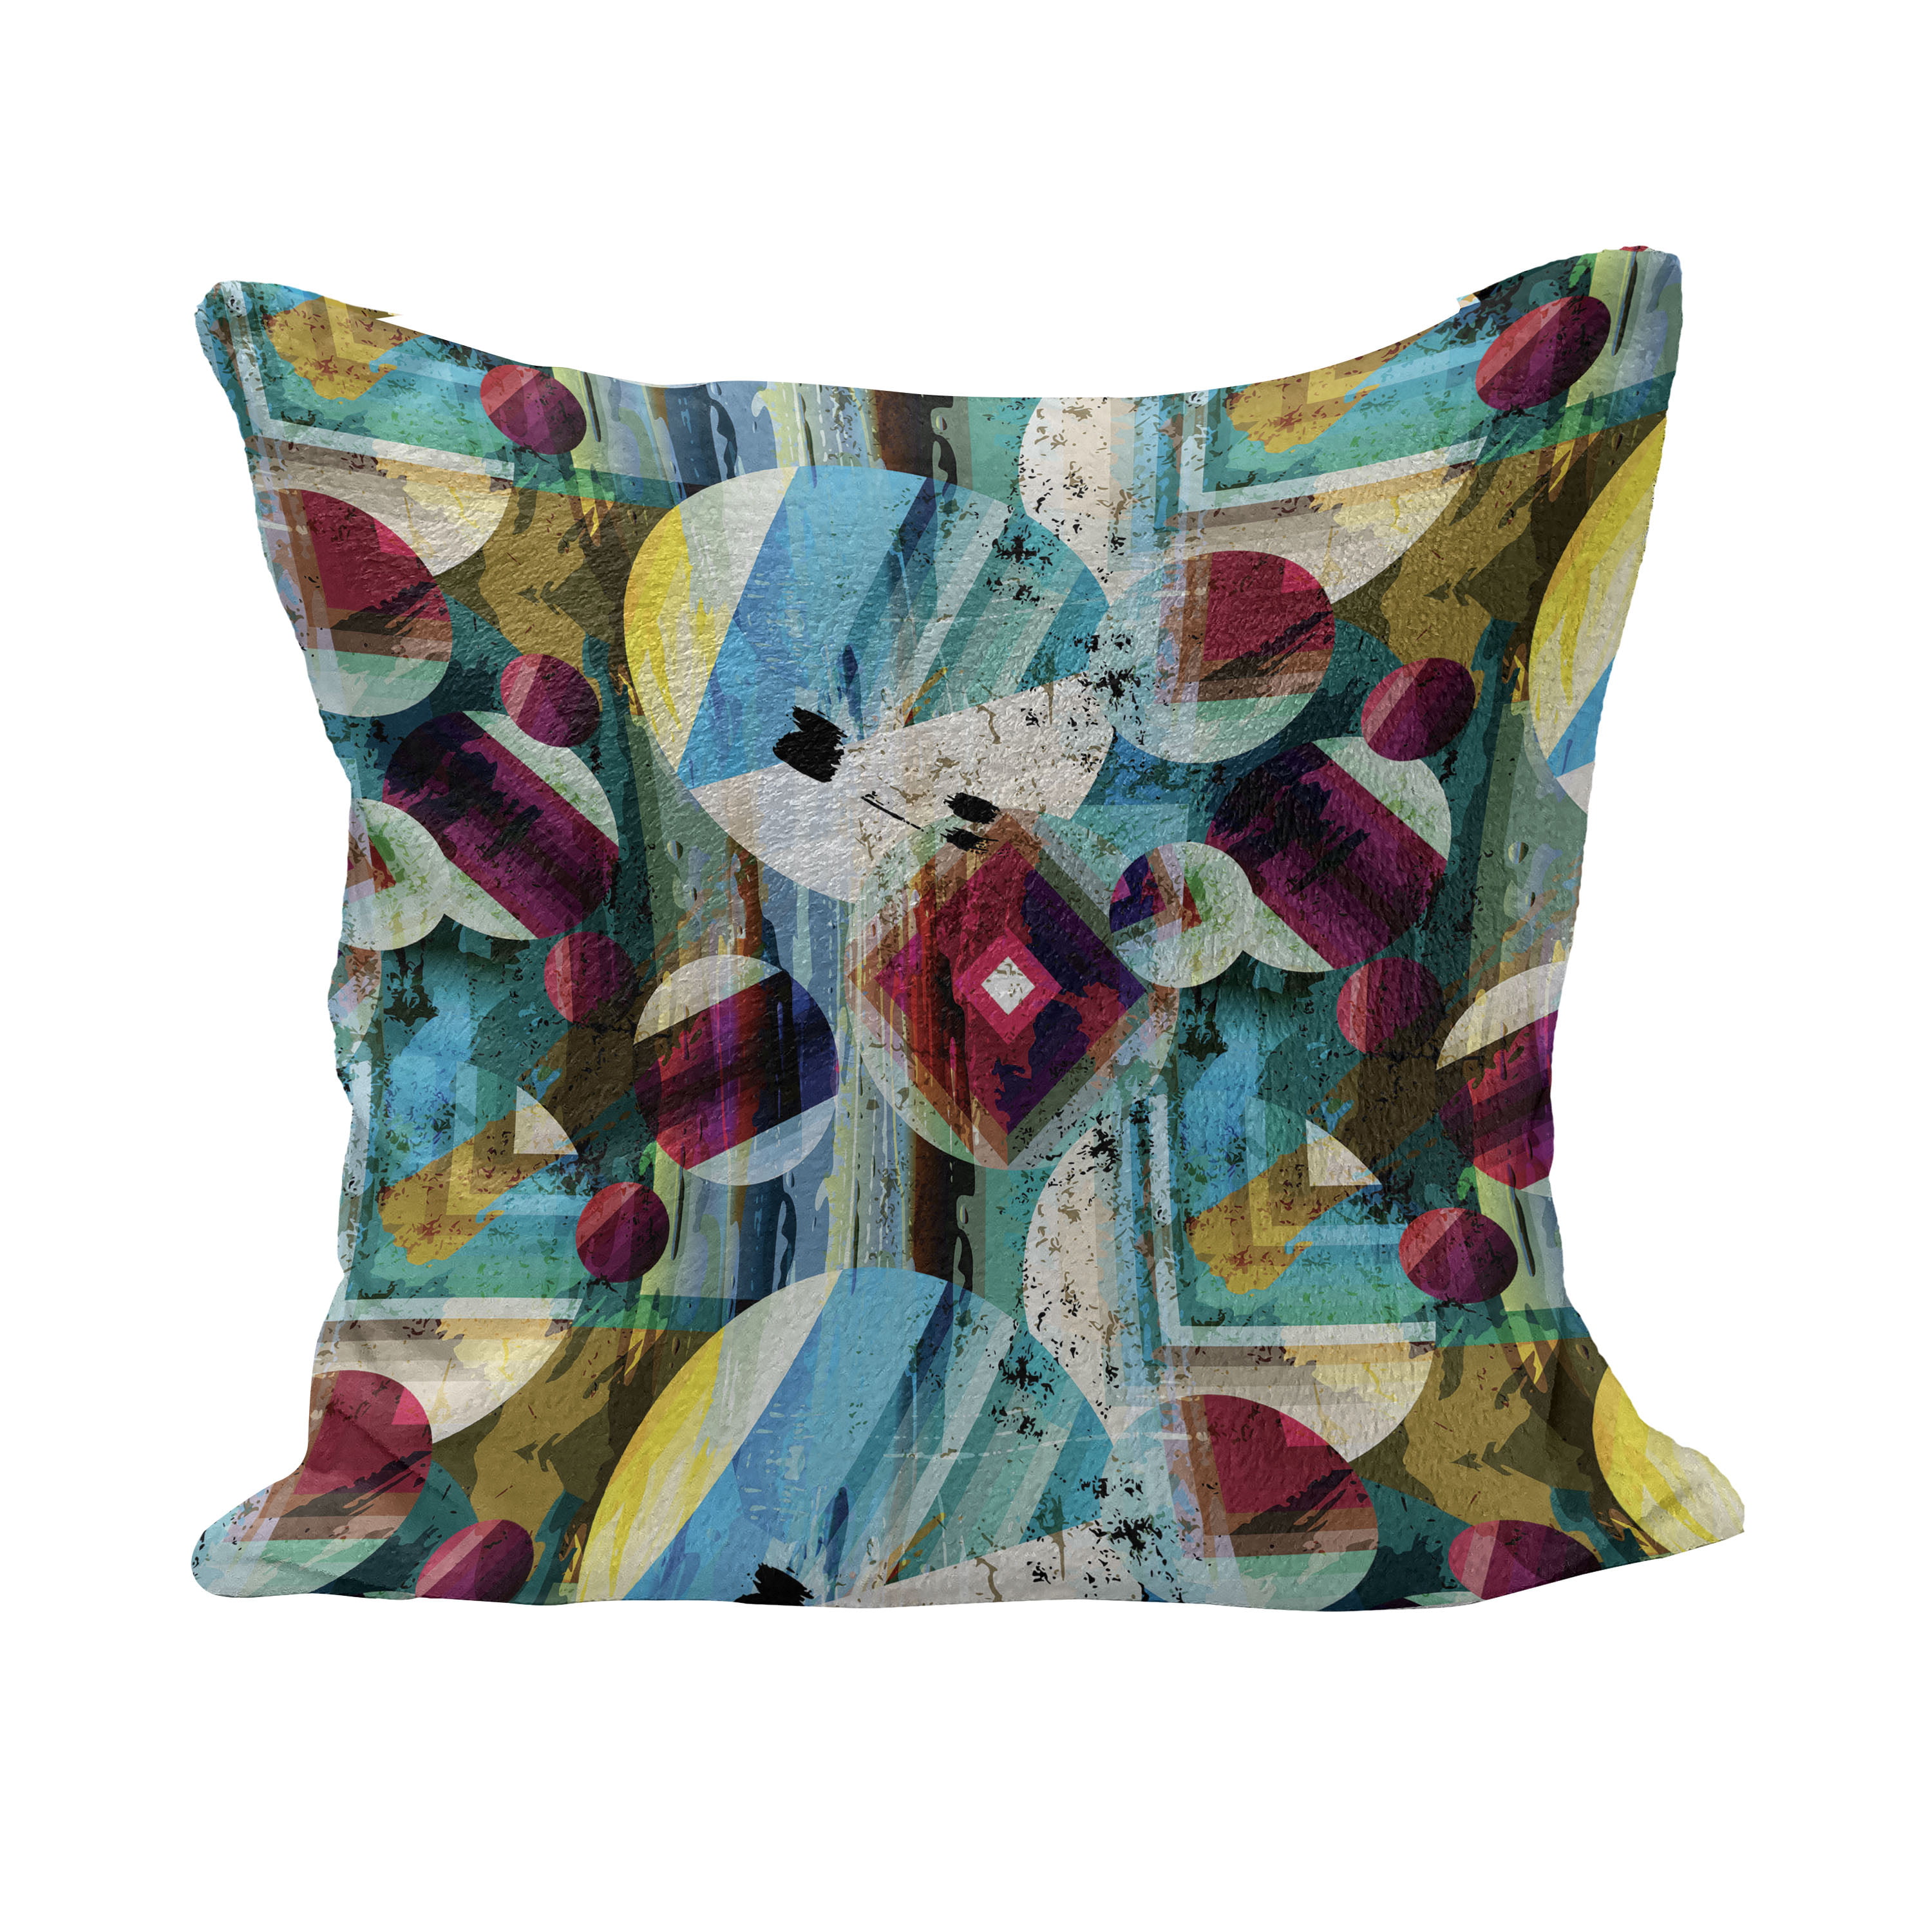 The Pillow Collection Matisse Zigzag Currant Down Filled Throw Pillow